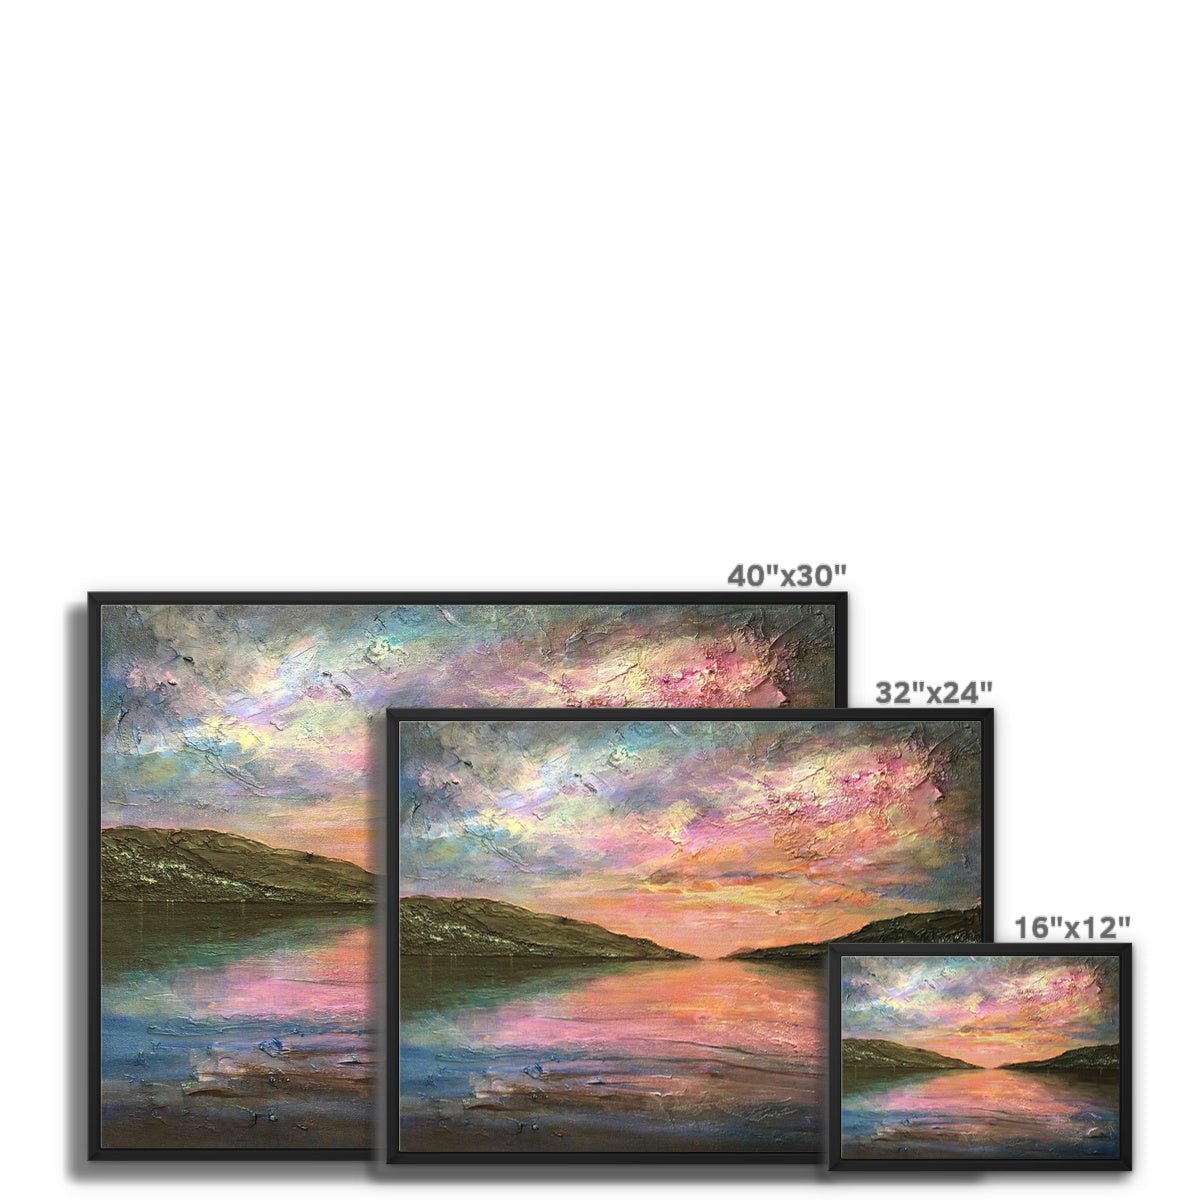 Loch Ness Dawn Painting | Framed Canvas From Scotland-Floating Framed Canvas Prints-Scottish Lochs & Mountains Art Gallery-Paintings, Prints, Homeware, Art Gifts From Scotland By Scottish Artist Kevin Hunter